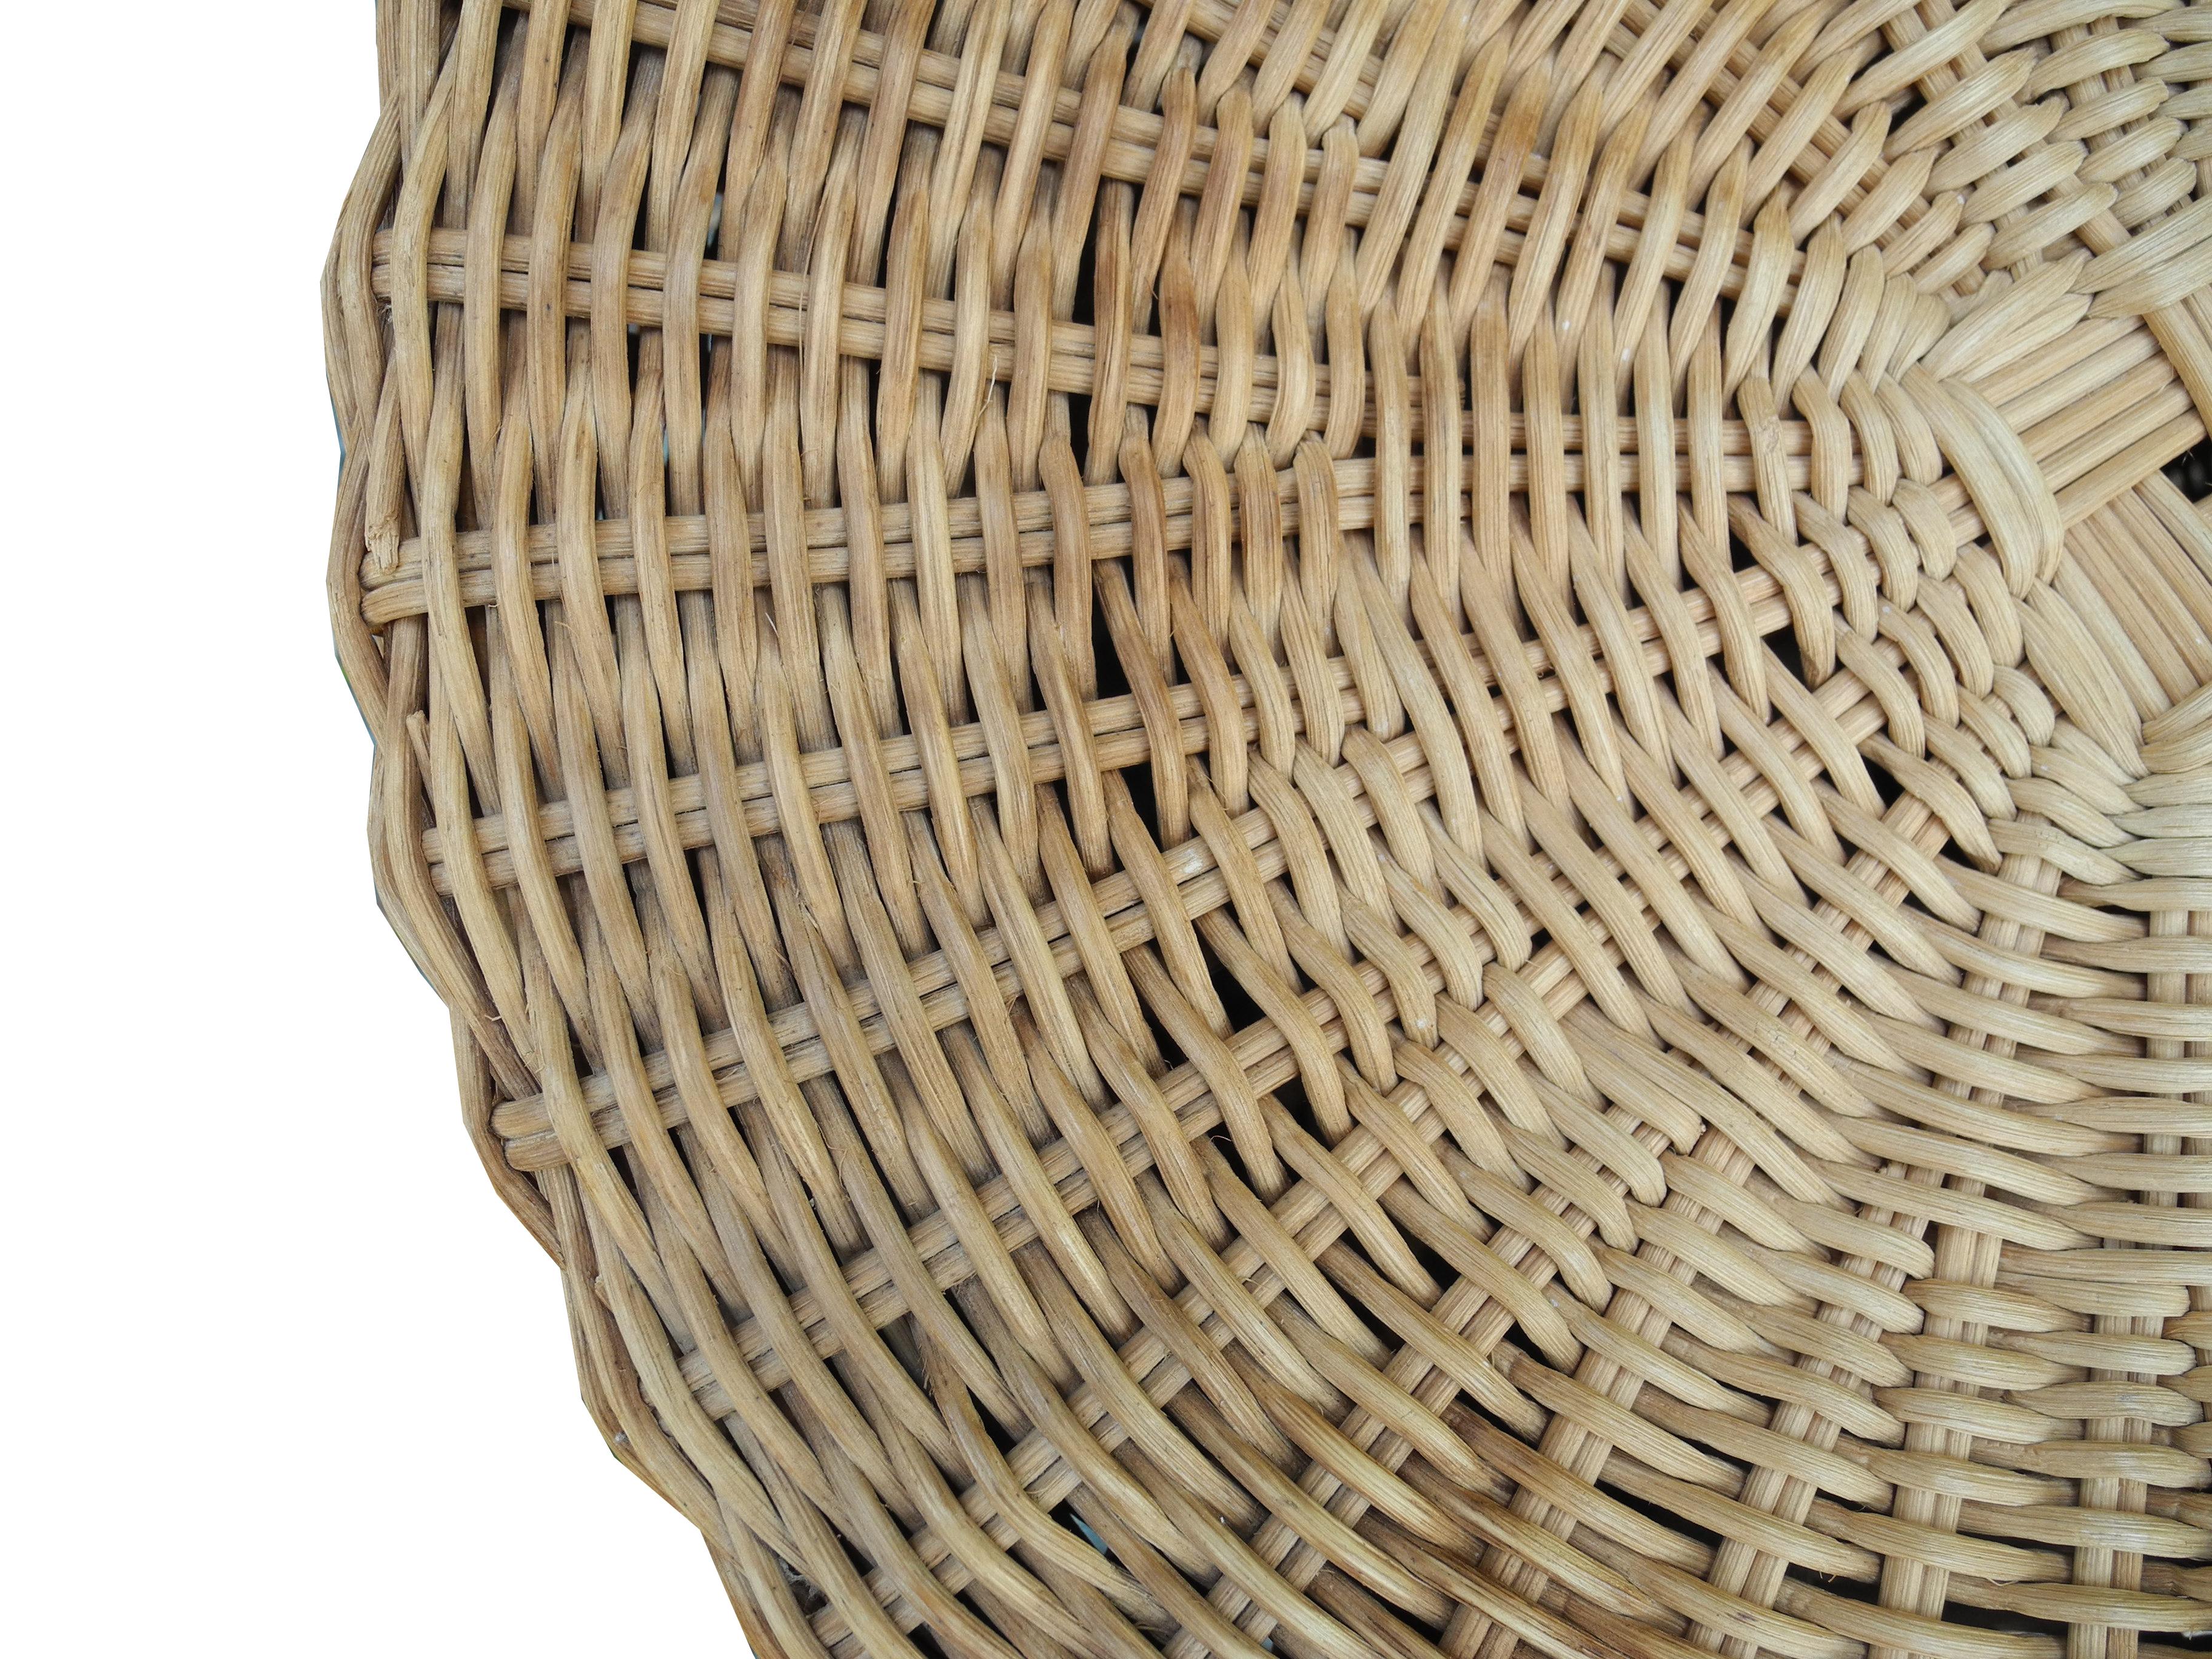 20th Century Mid-Century Modern Wicker Stool or Side Table by Eero Aarnio for Stendig, 1960s